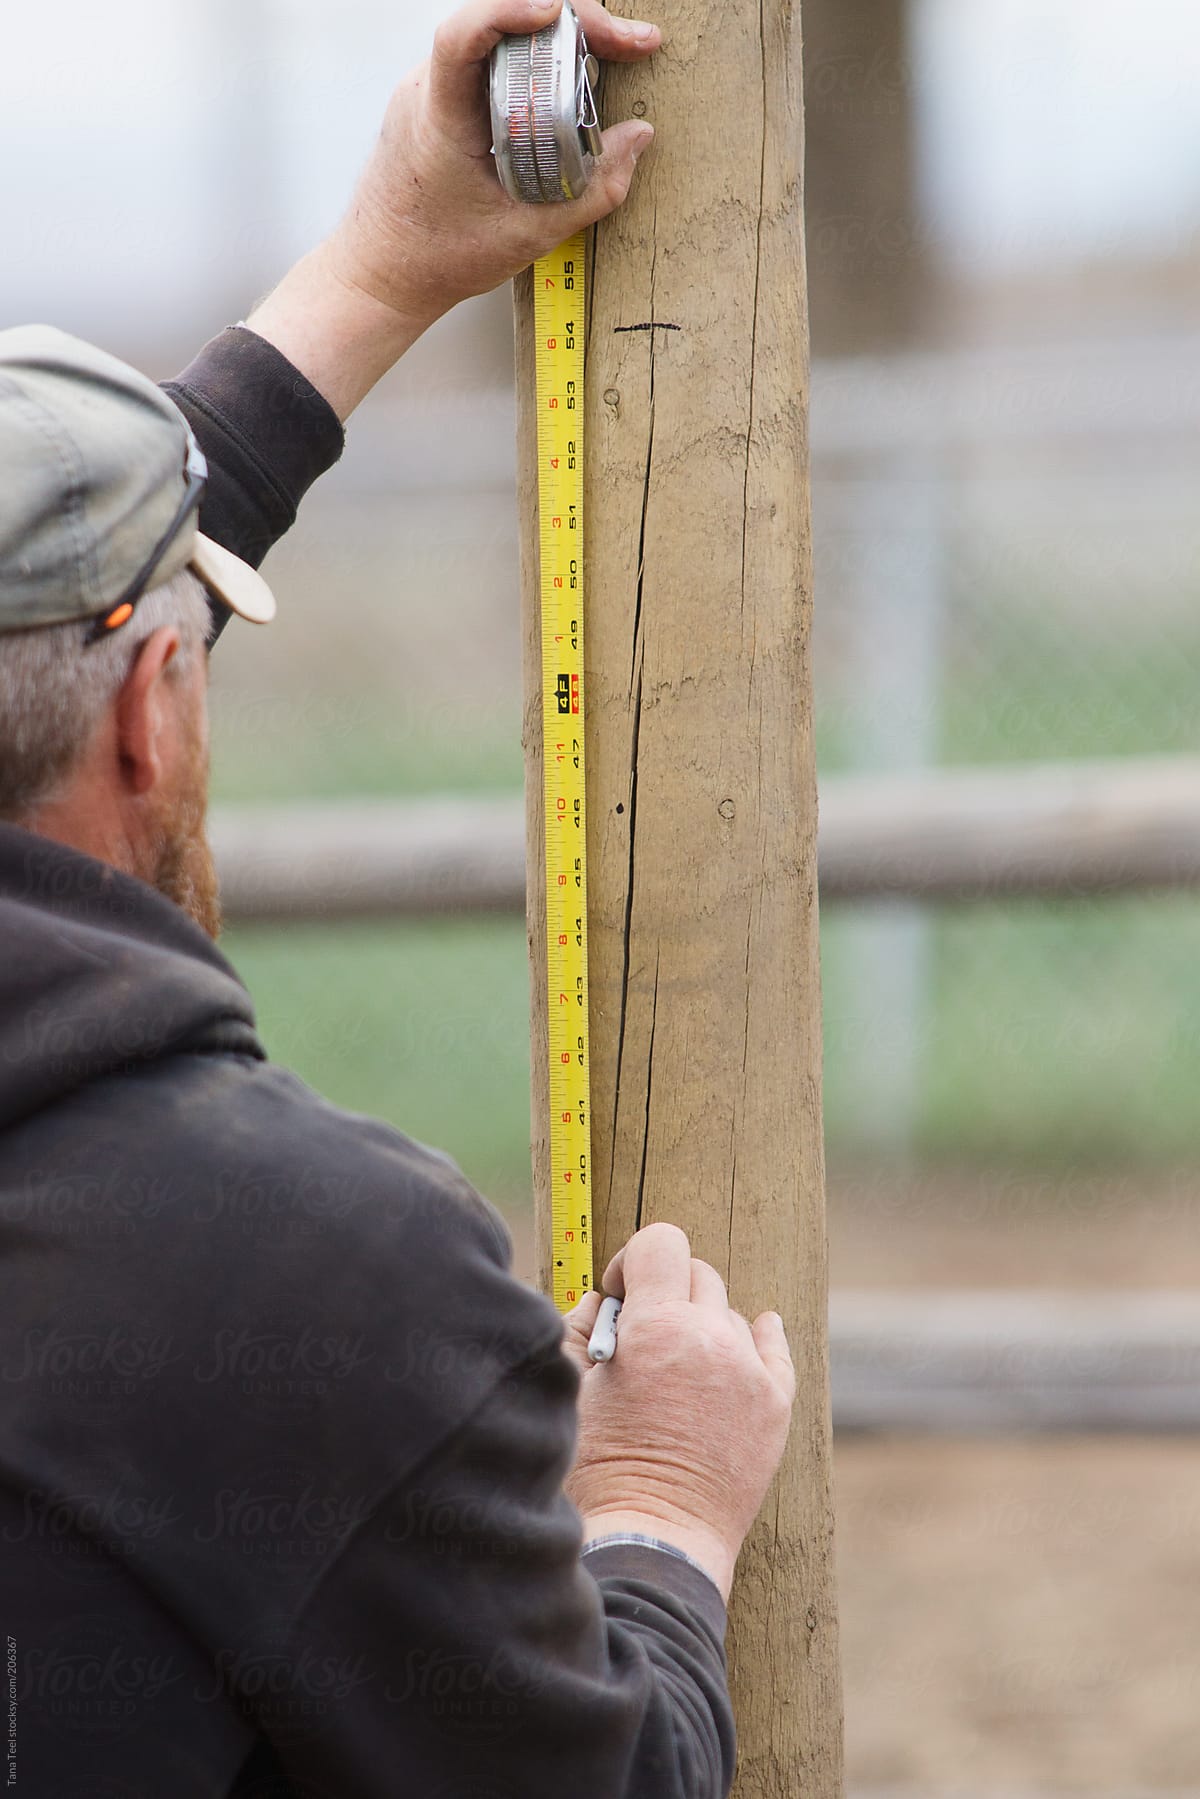 Man uses measuring tape to measure a fence post